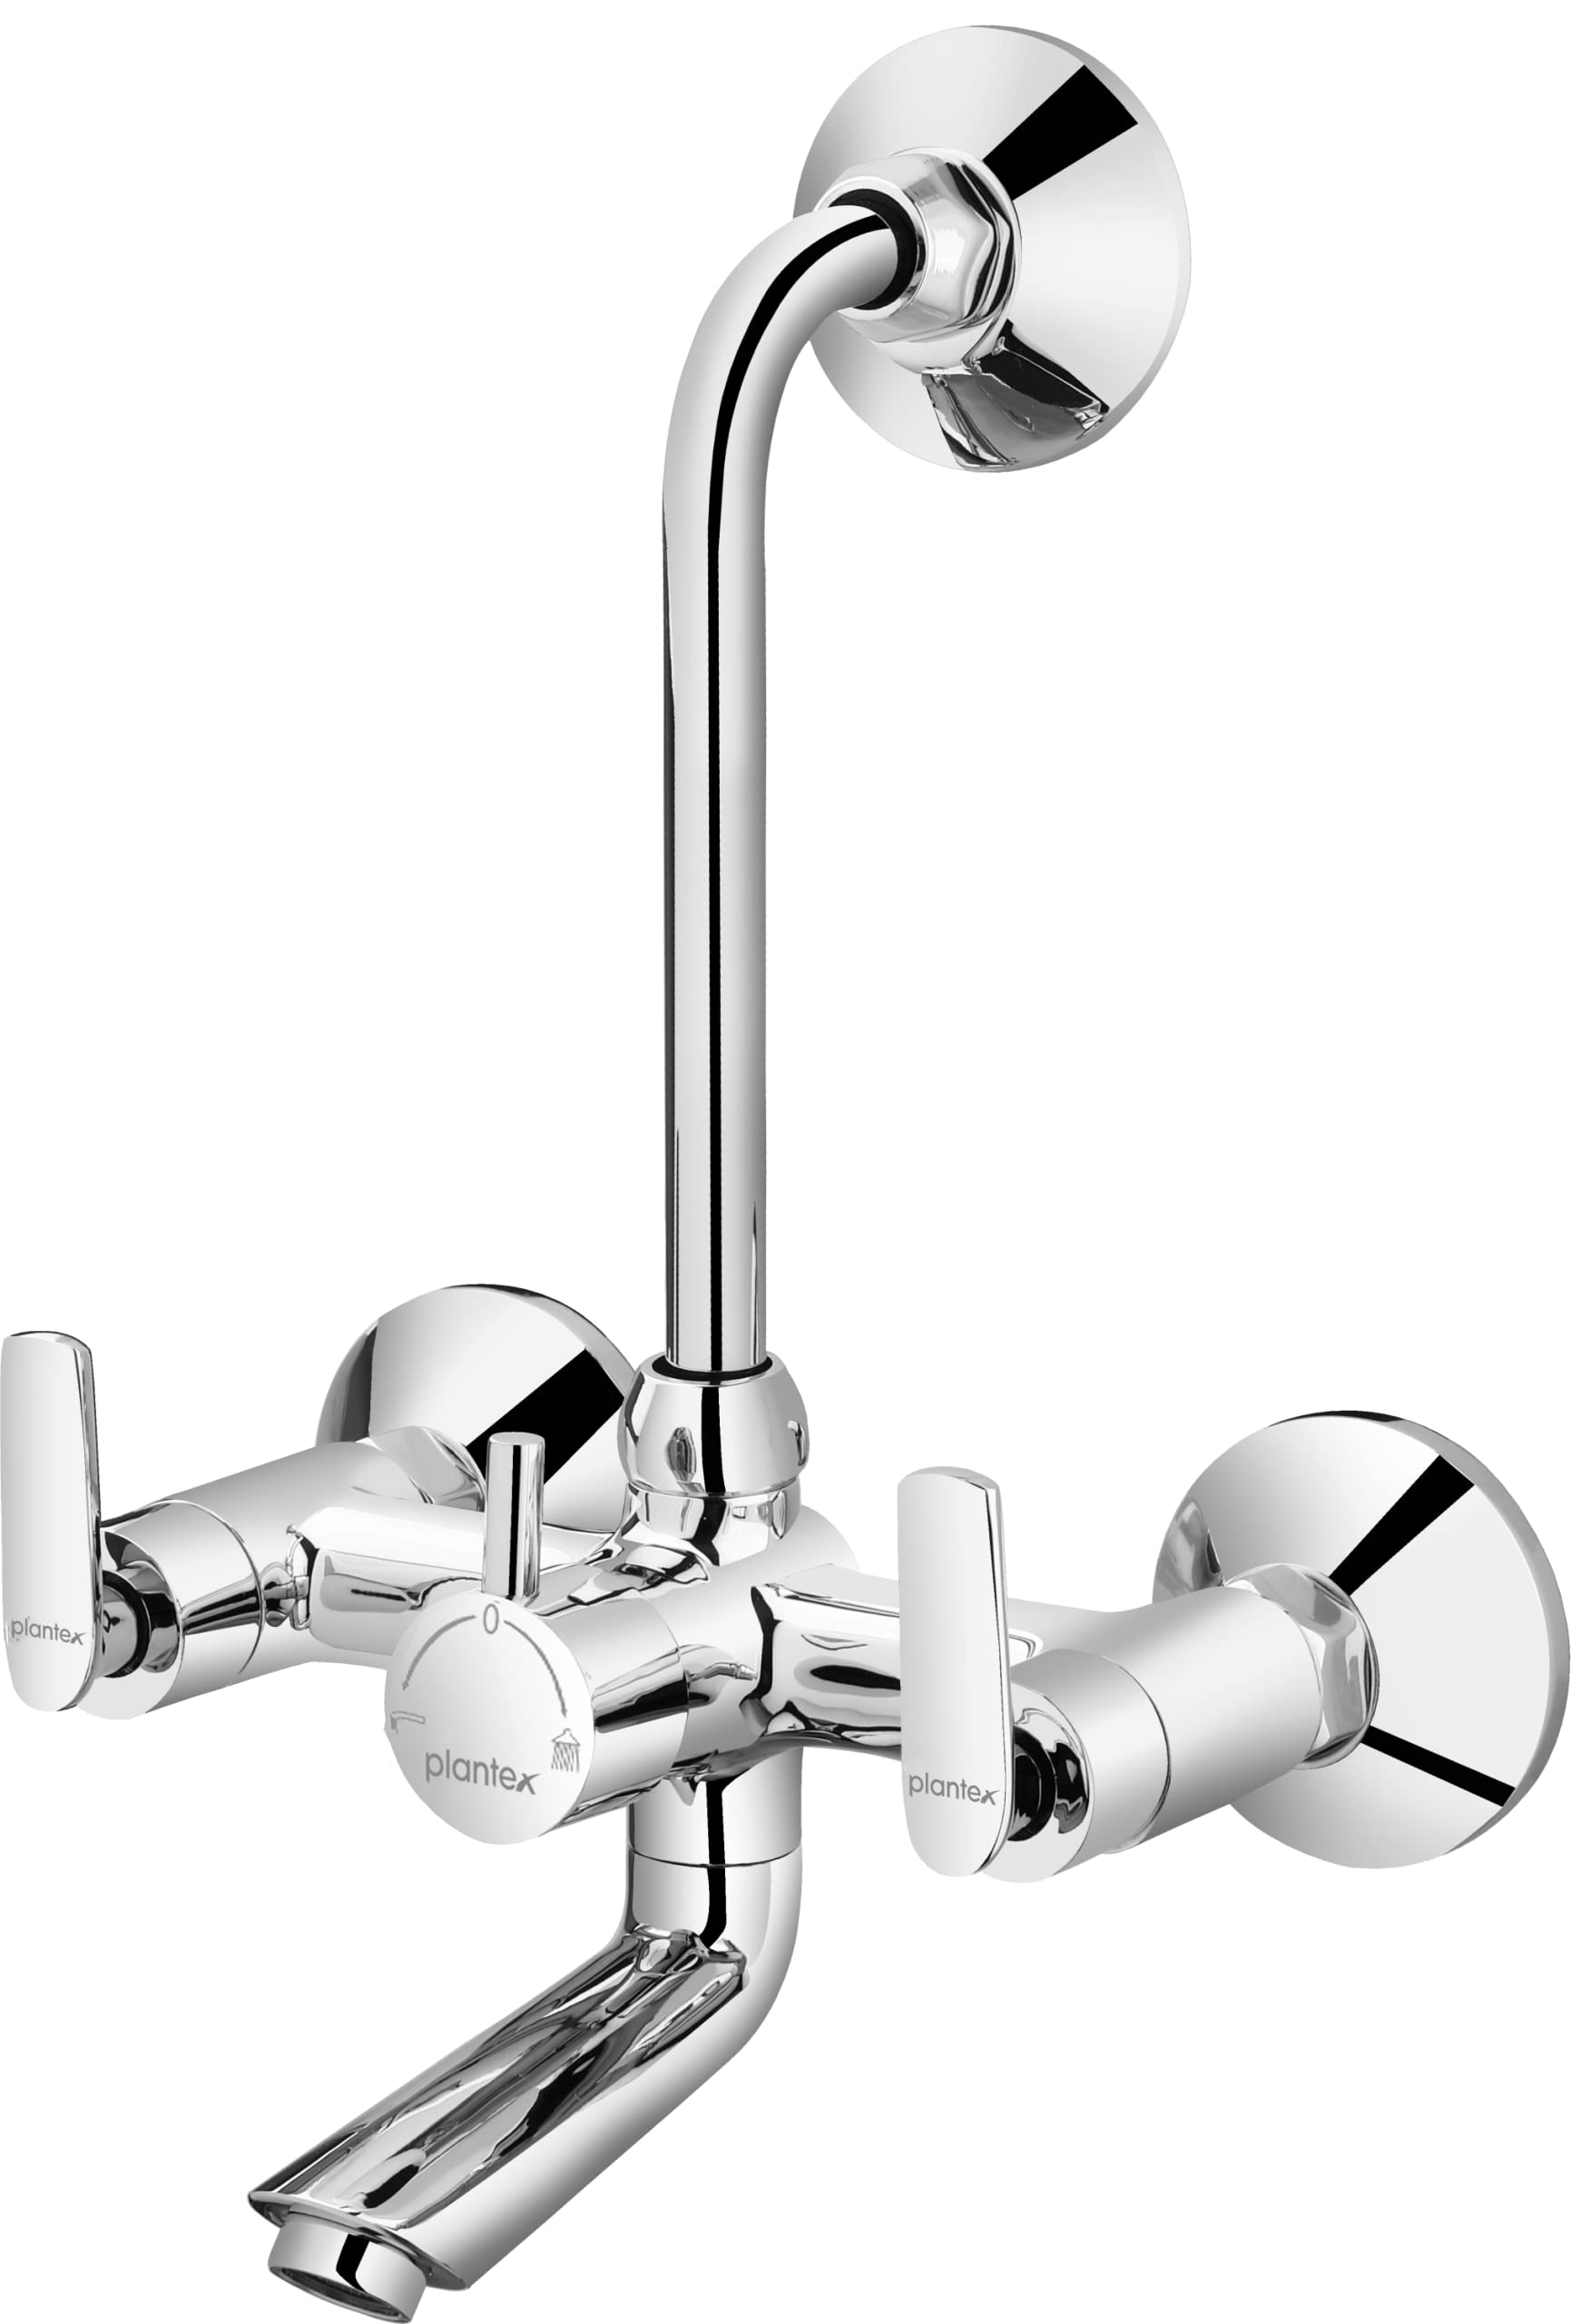 Plantex BAL-518 Pure Brass 2-in-1 Wall Mixer with Telephonic Bend for Arrangement of Overhead Shower/Wall Mixer for Bathroom with Brass Wall Flange & Teflon Tape - Wall Mount (Mirror-Chrome Finish)